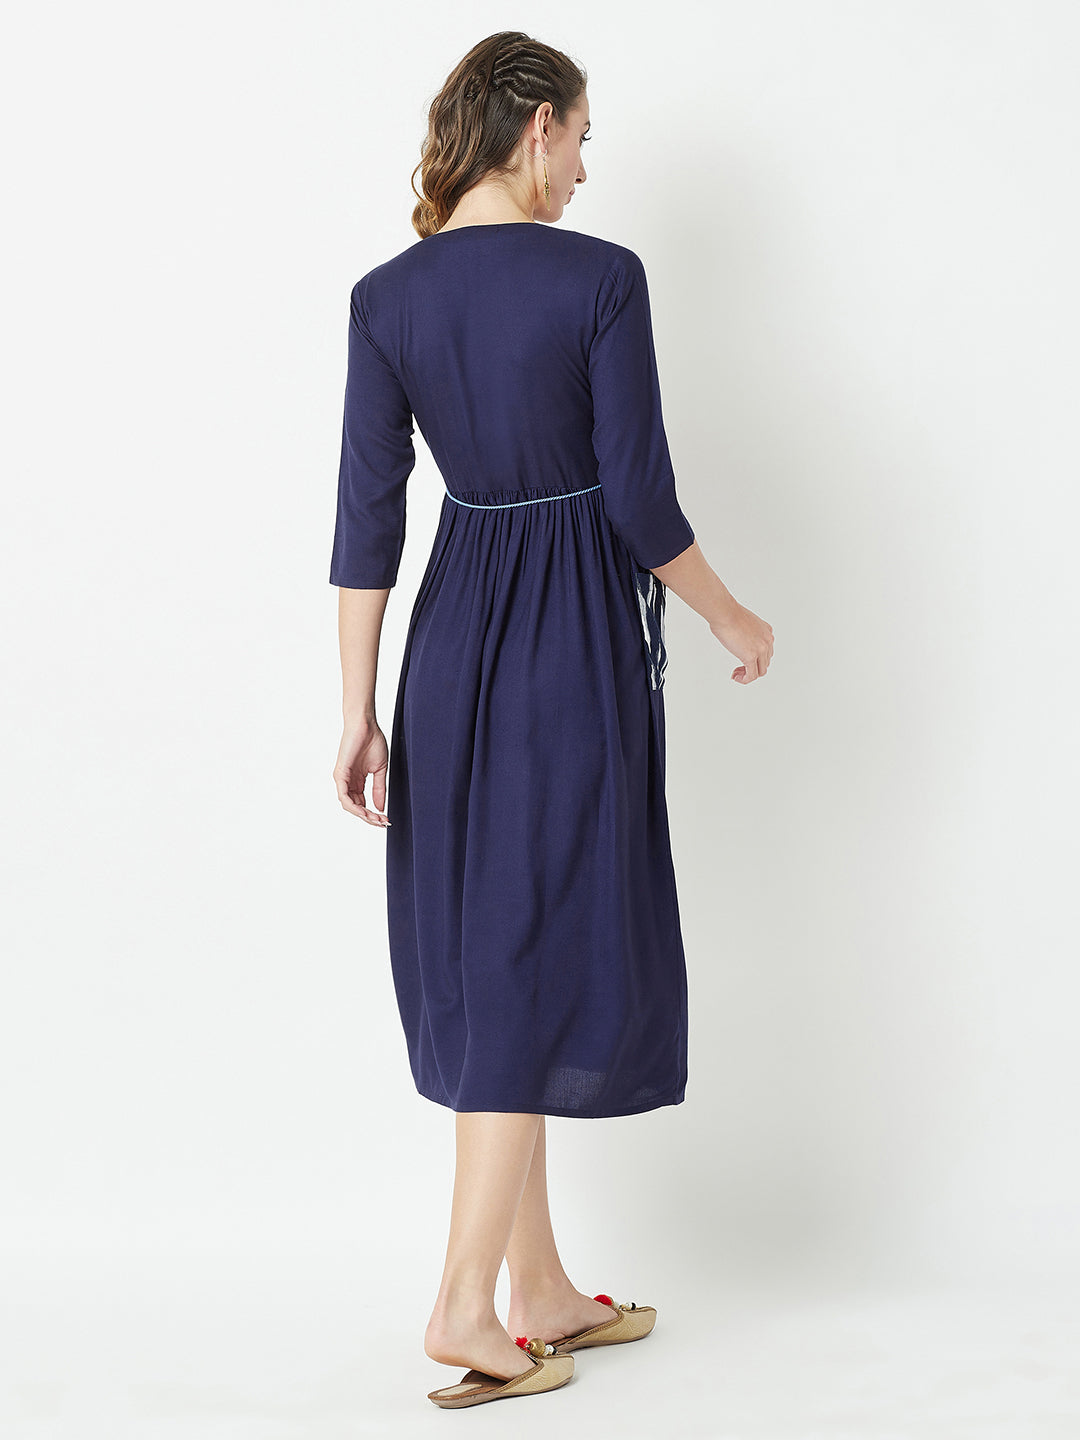 Women's Navy Blue Round Neck 3/4 Sleeve Belted Solid Gathered Midi Dress